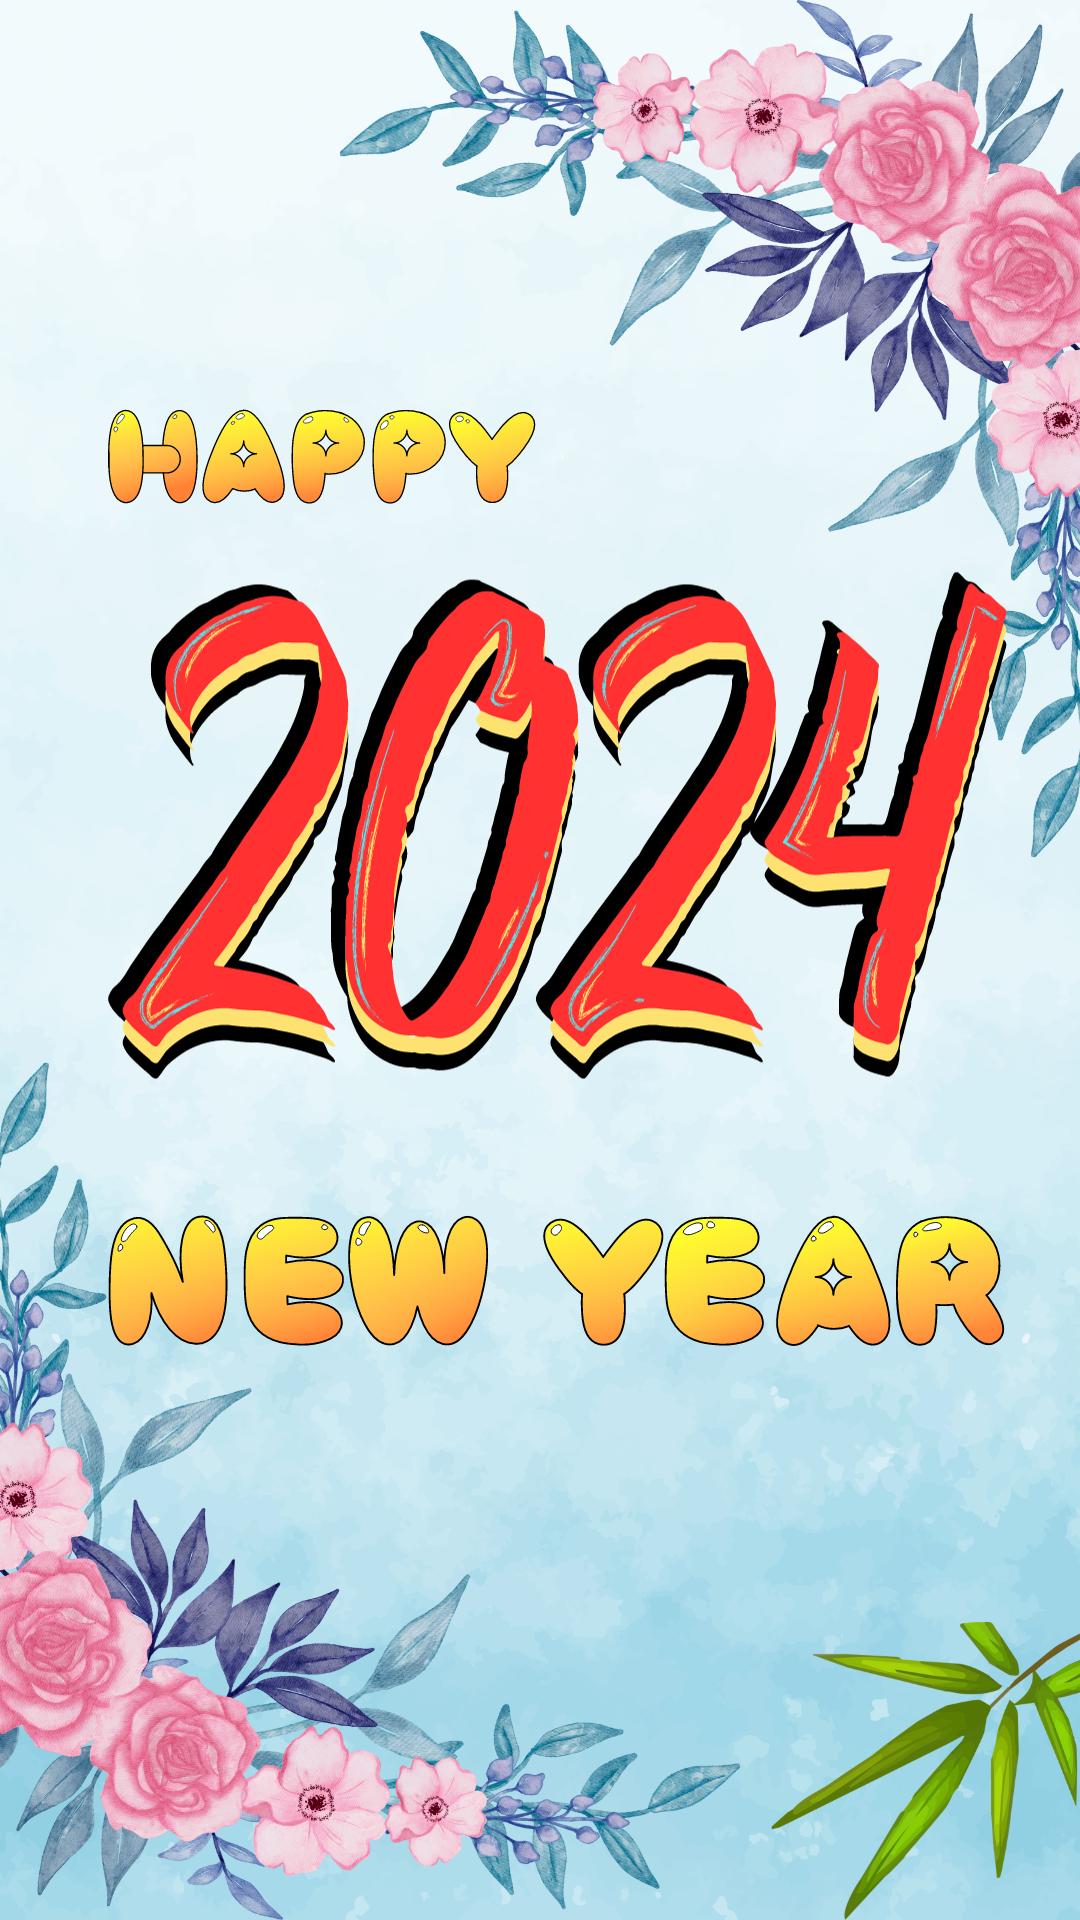 Happy 2024 New year - Blue Flower Watercolor Background phone wallpaper(1080 × 1920 px)